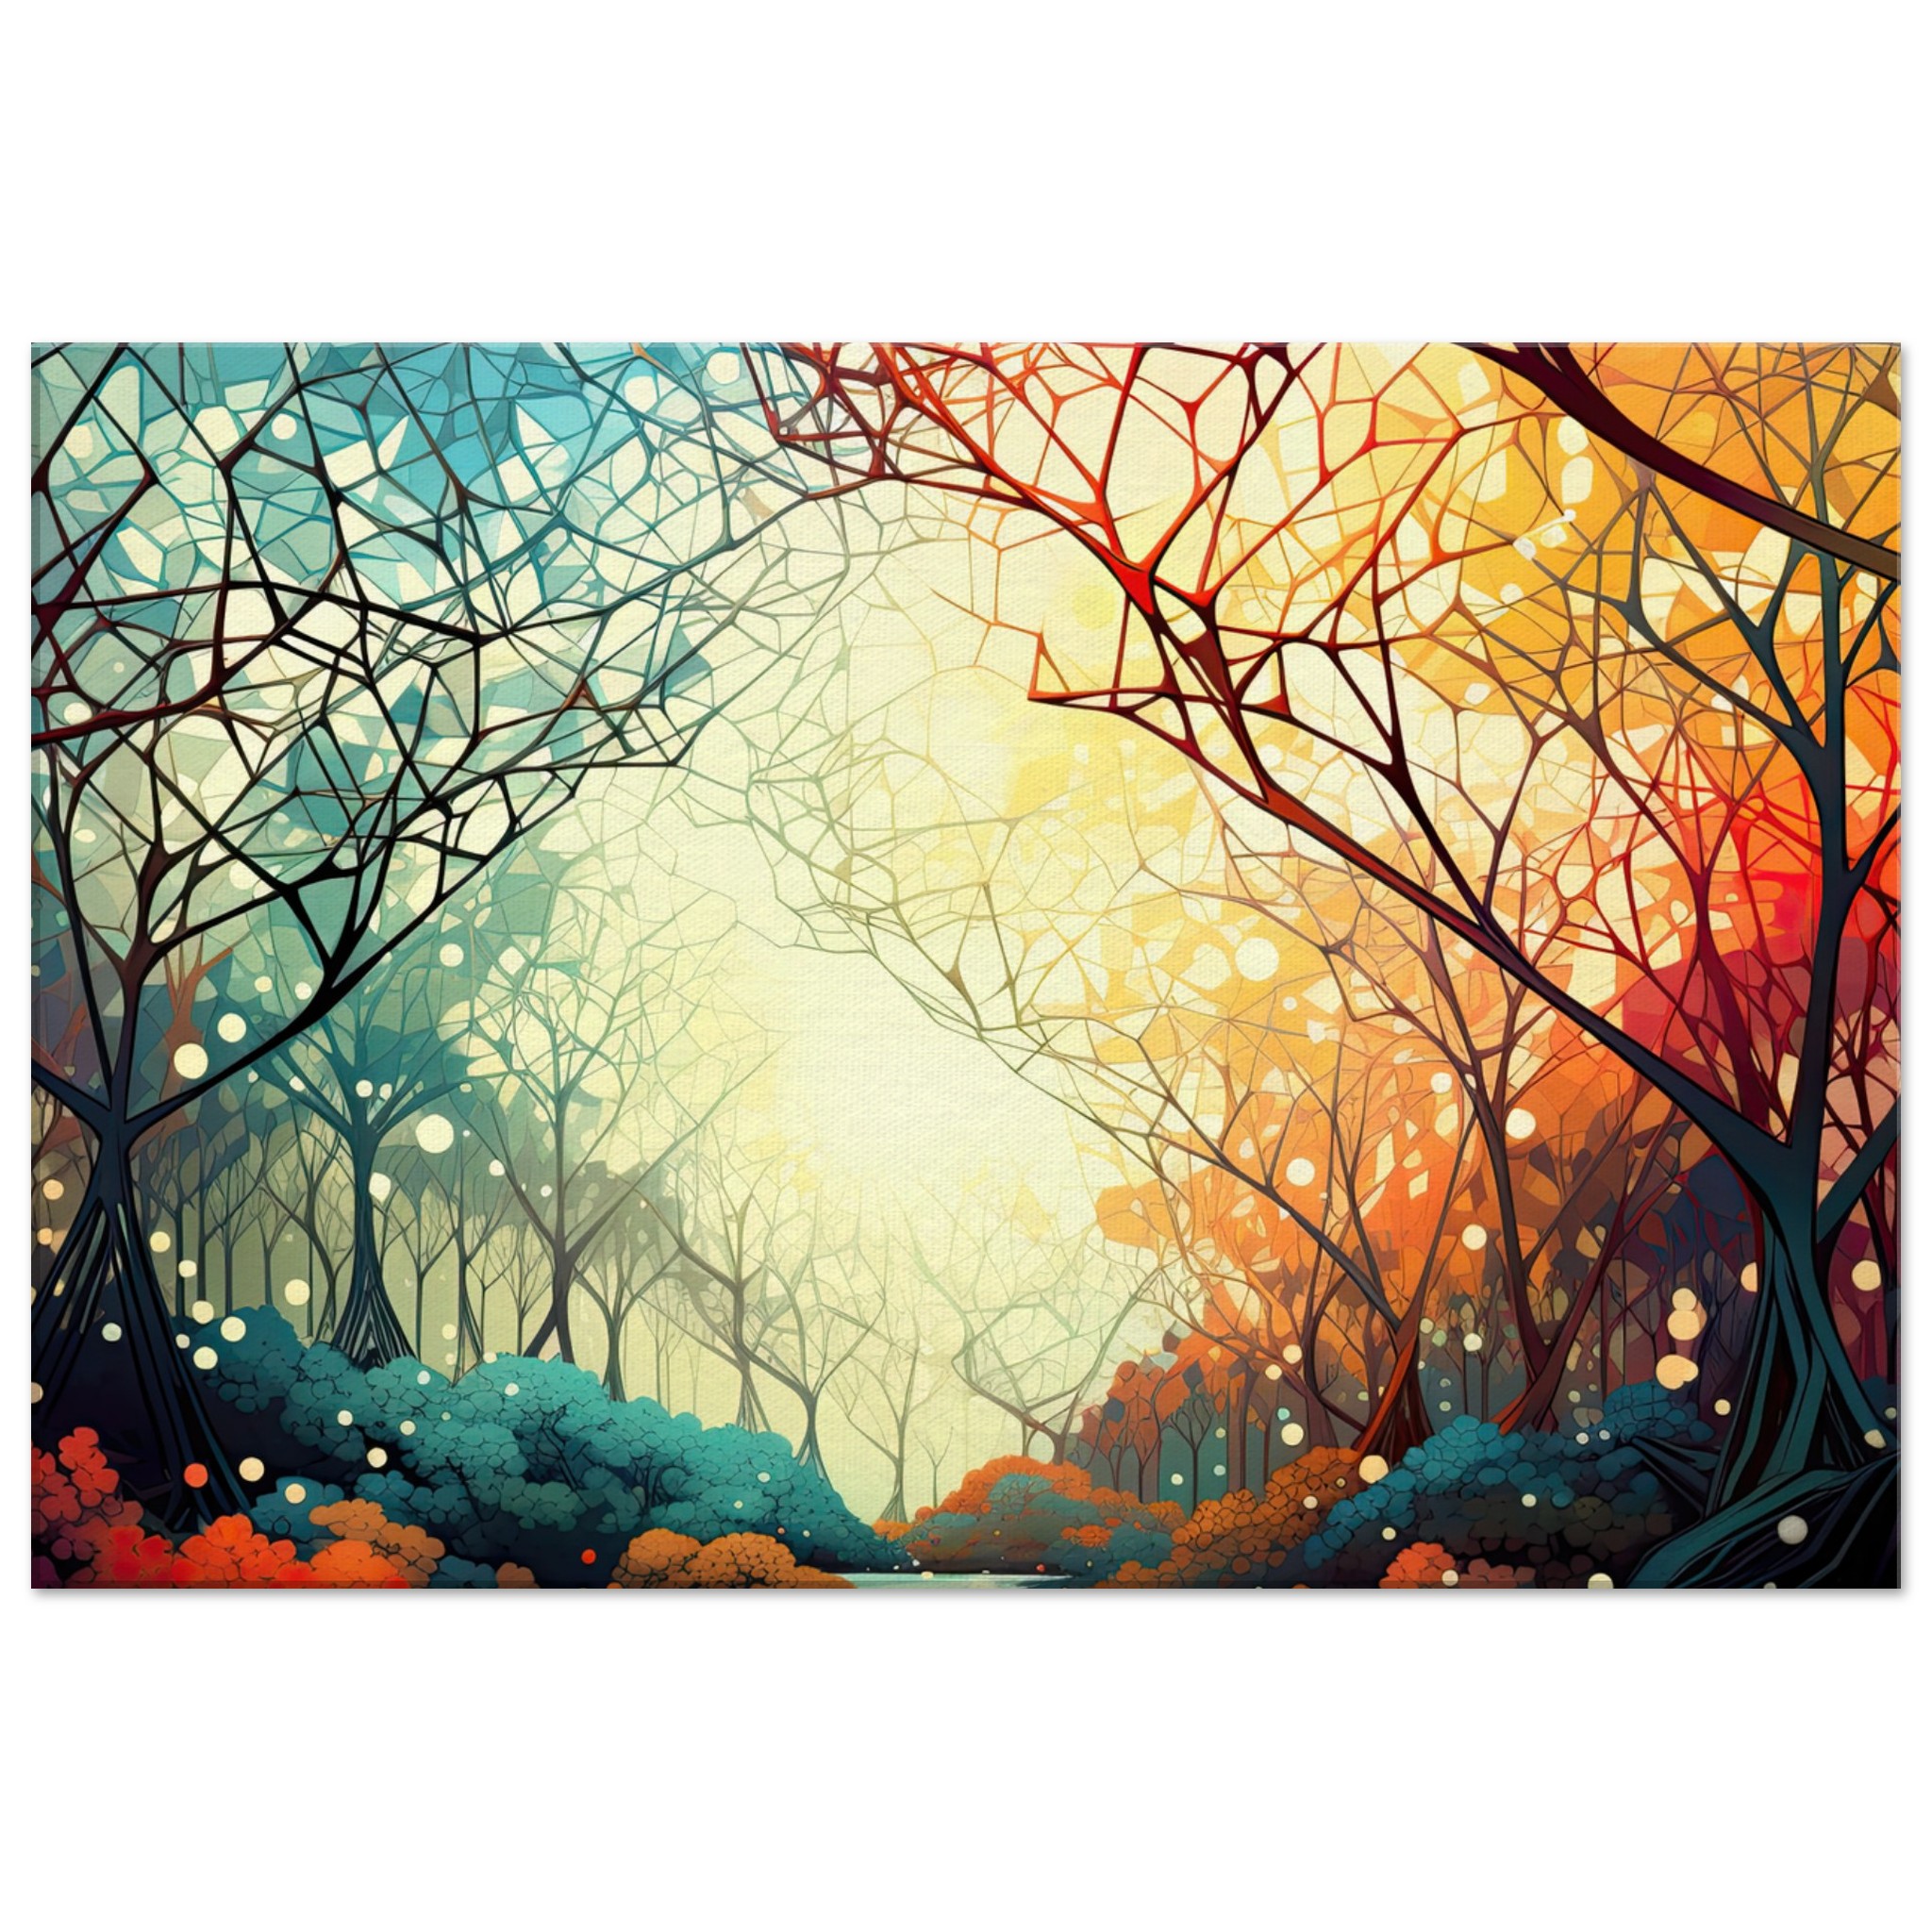 Forest Colorful Abstract Landscape Canvas Print – 50×75 cm / 20×30″, Slim